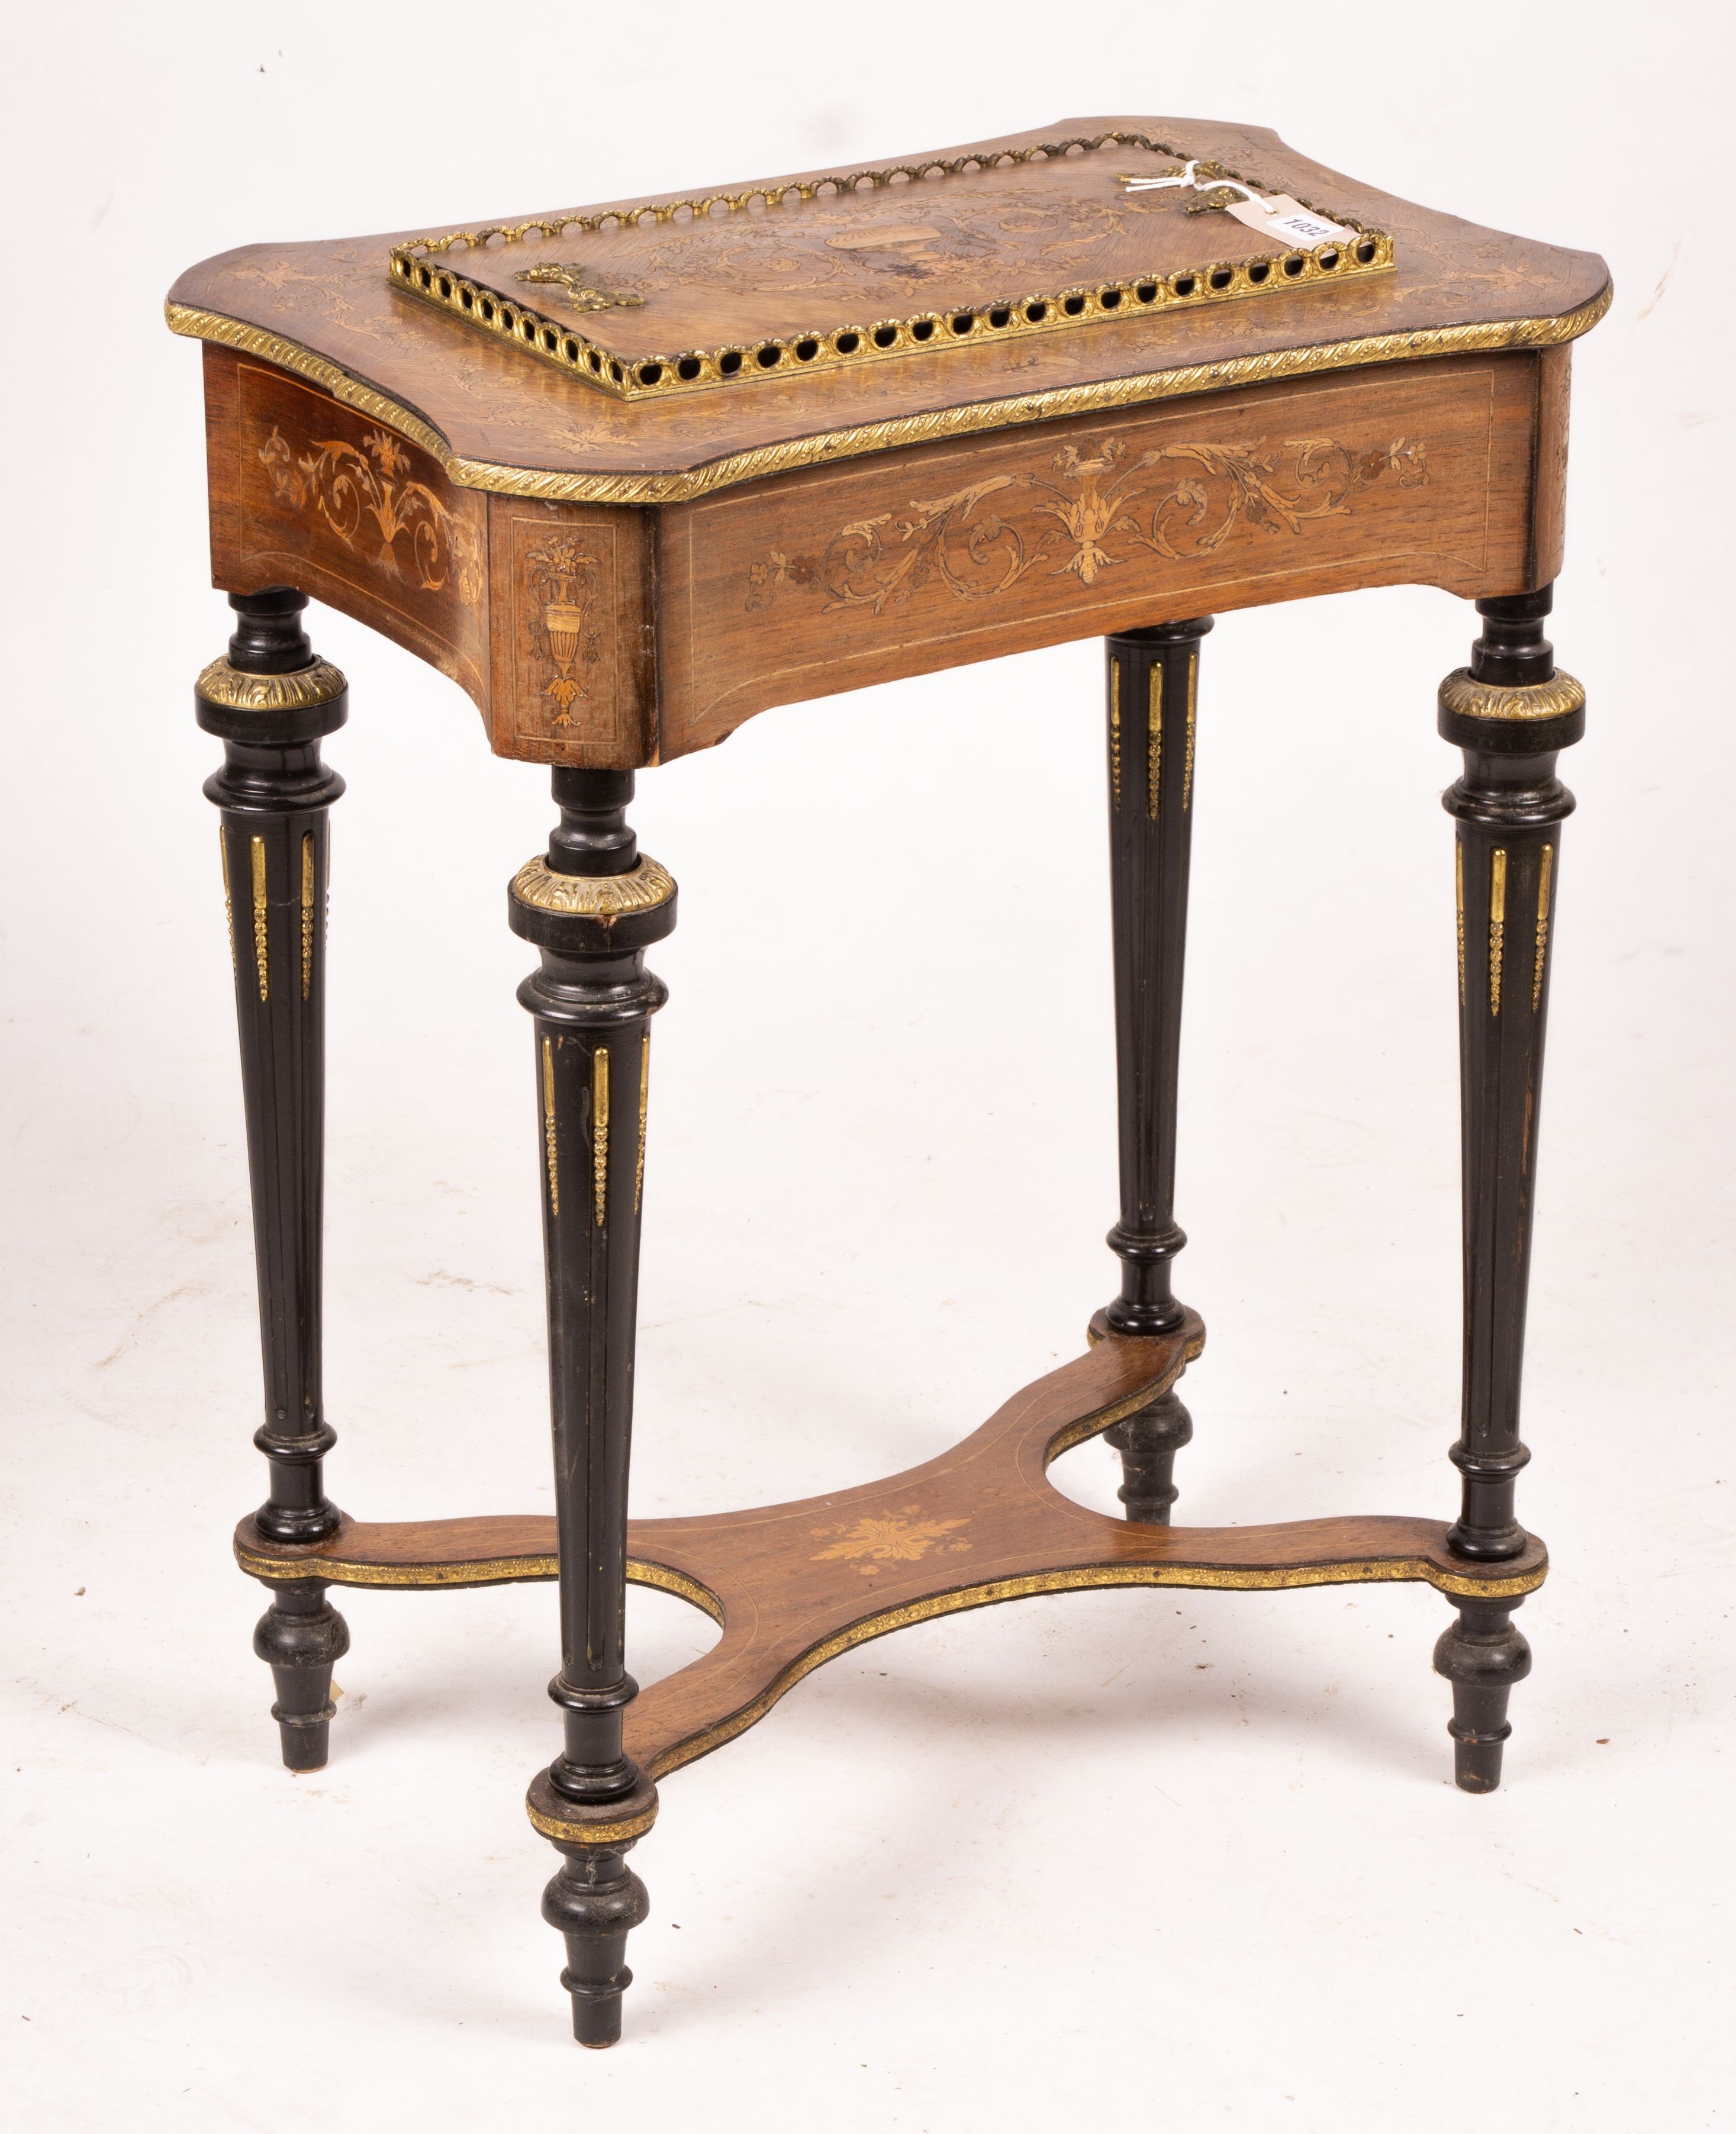 A 19th century French marquetry inlaid kingwood jardiniere table, width 60cm, depth 40cm, height 75cm